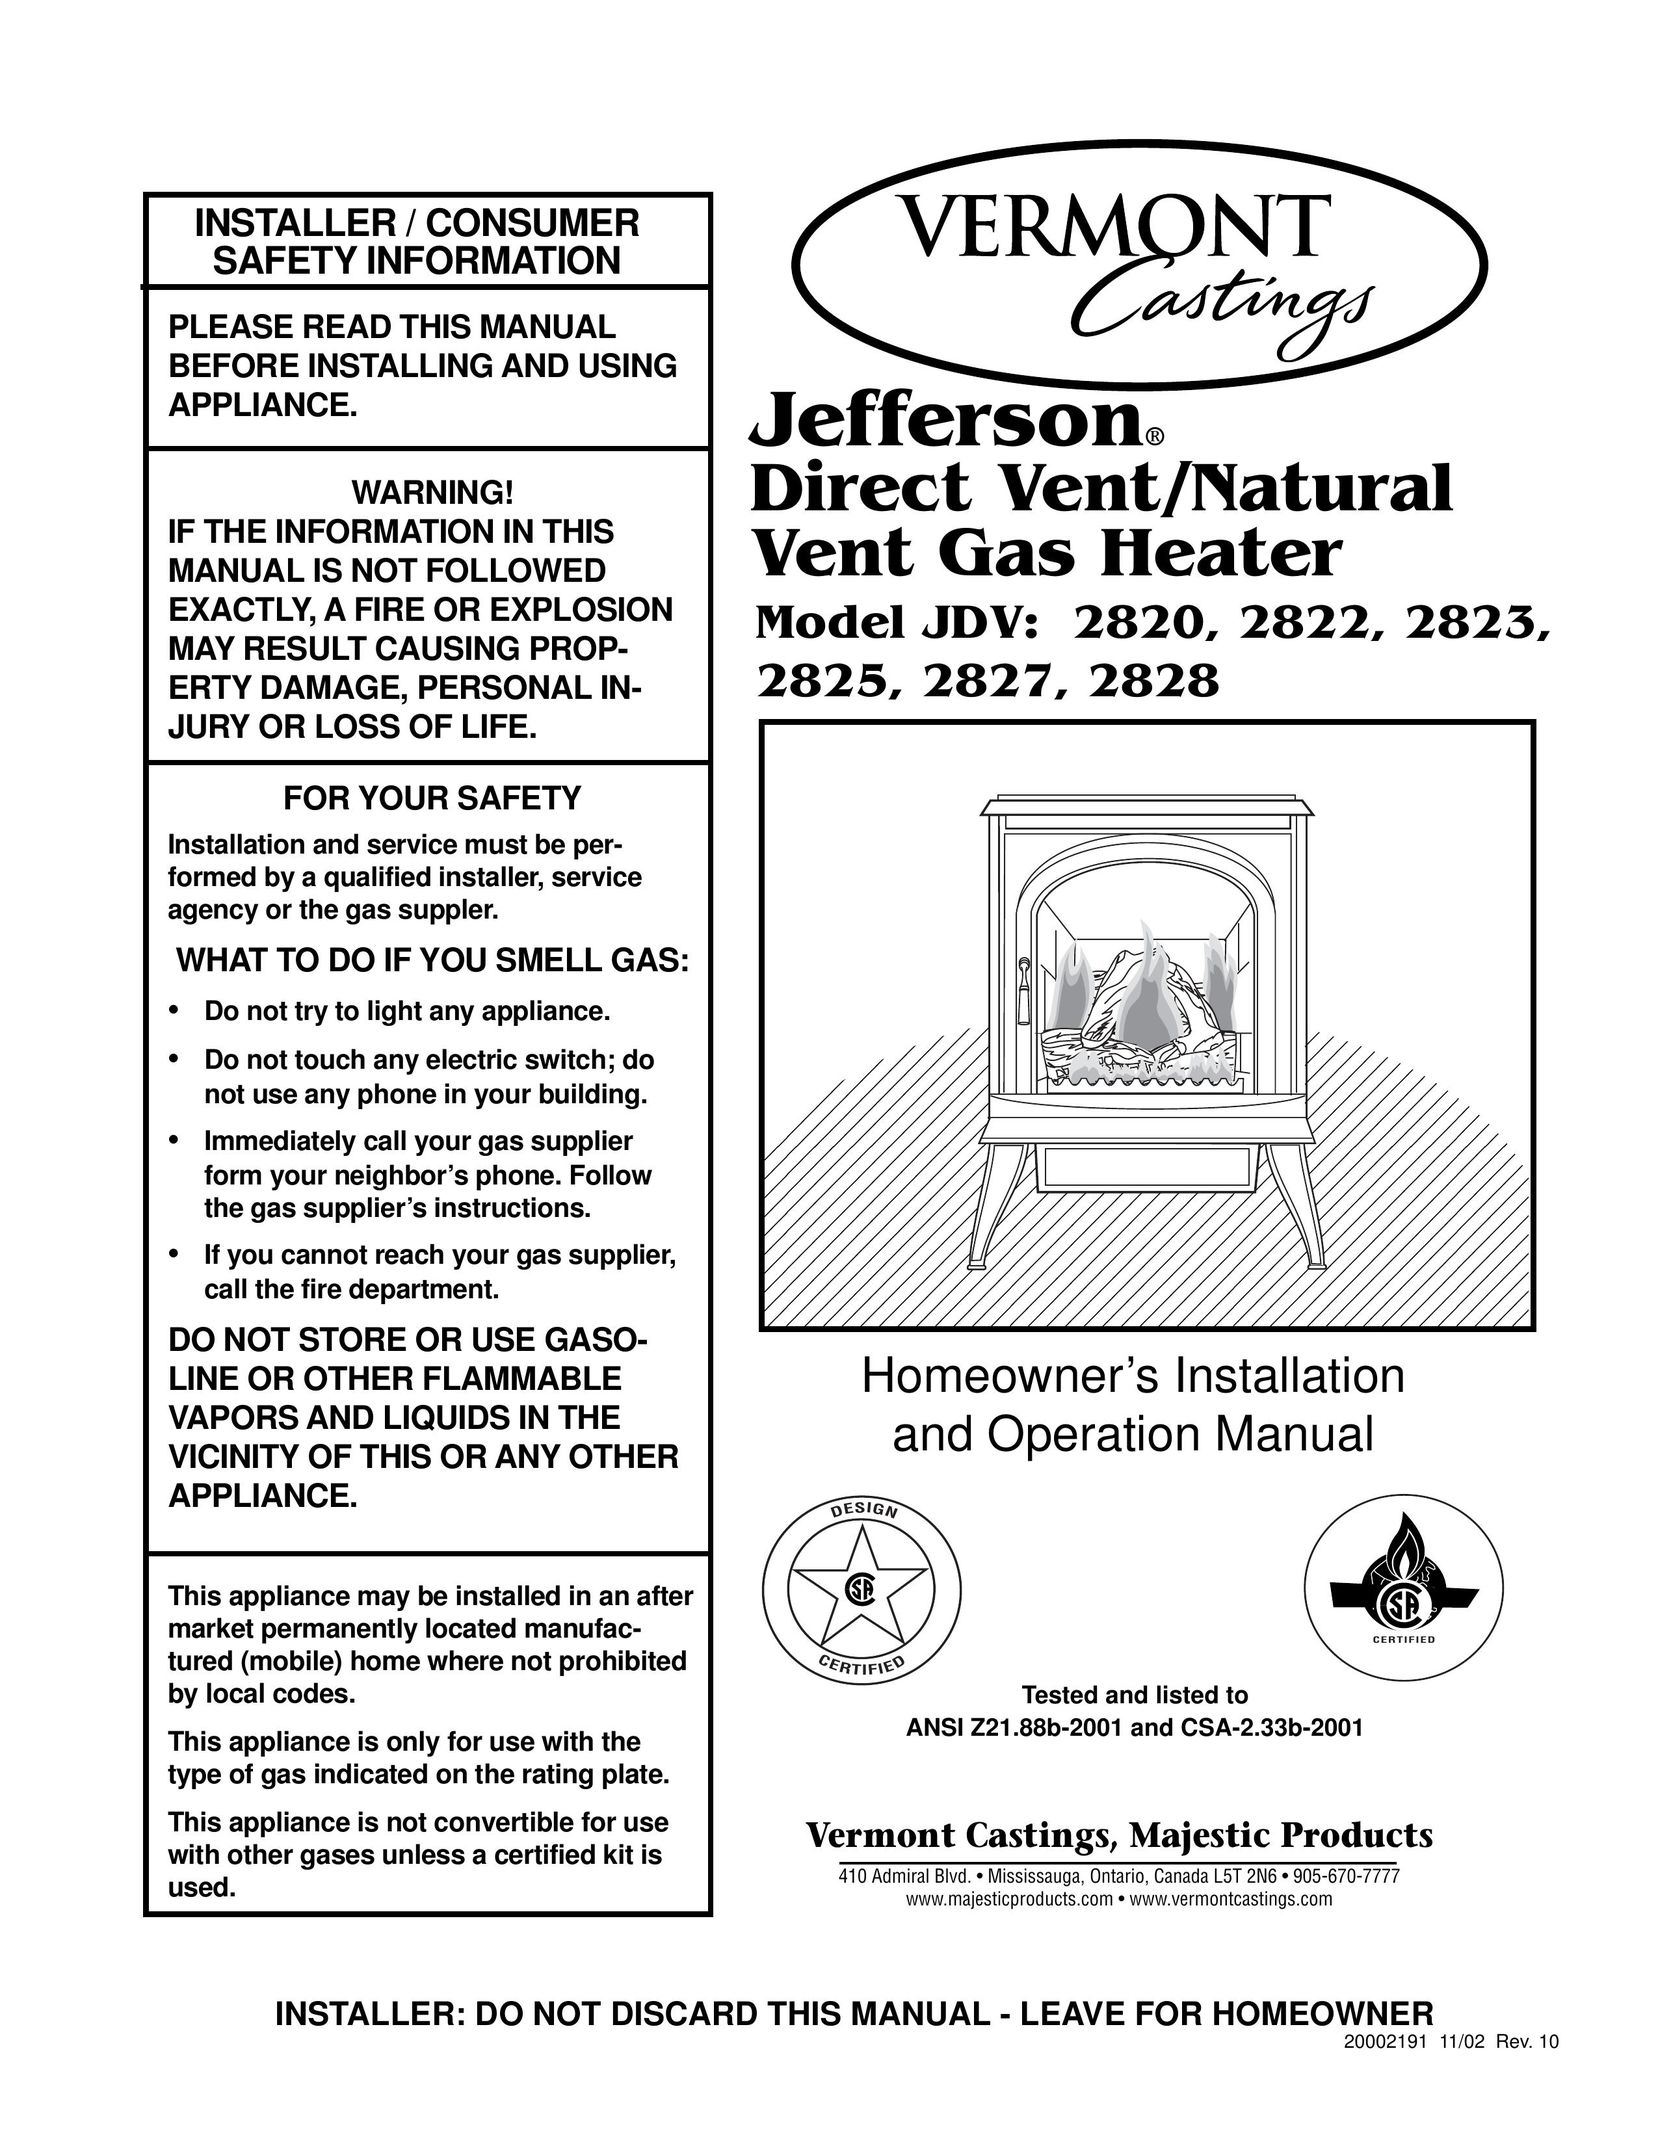 Vermont Casting 2828 Fan User Manual